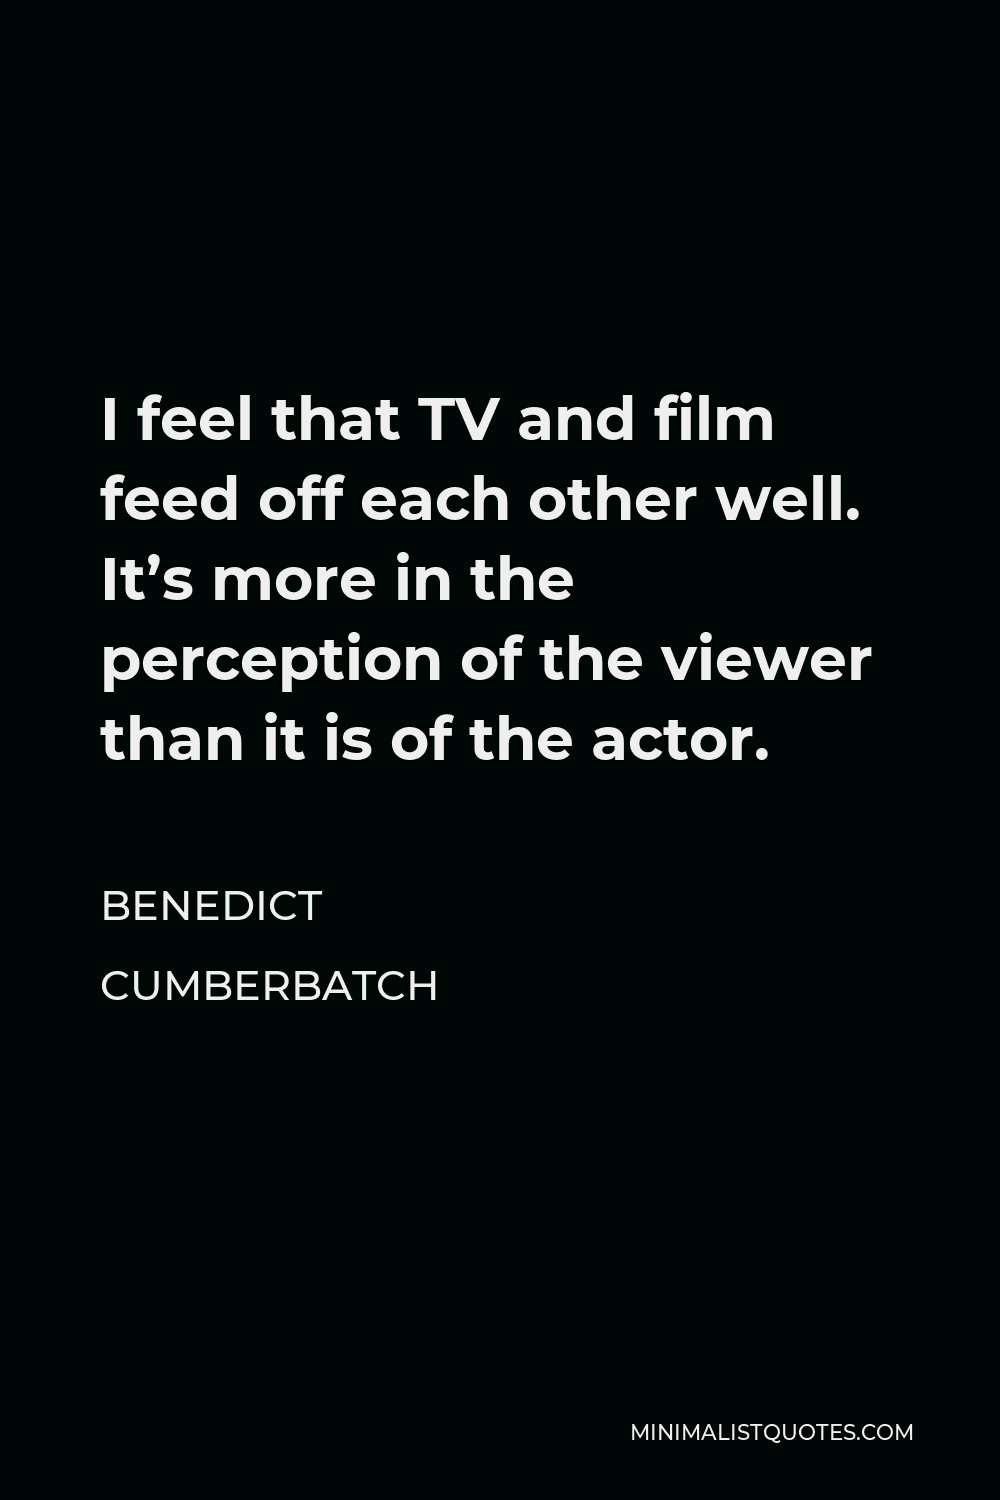 Benedict Cumberbatch Quote - I feel that TV and film feed off each other well. It’s more in the perception of the viewer than it is of the actor.